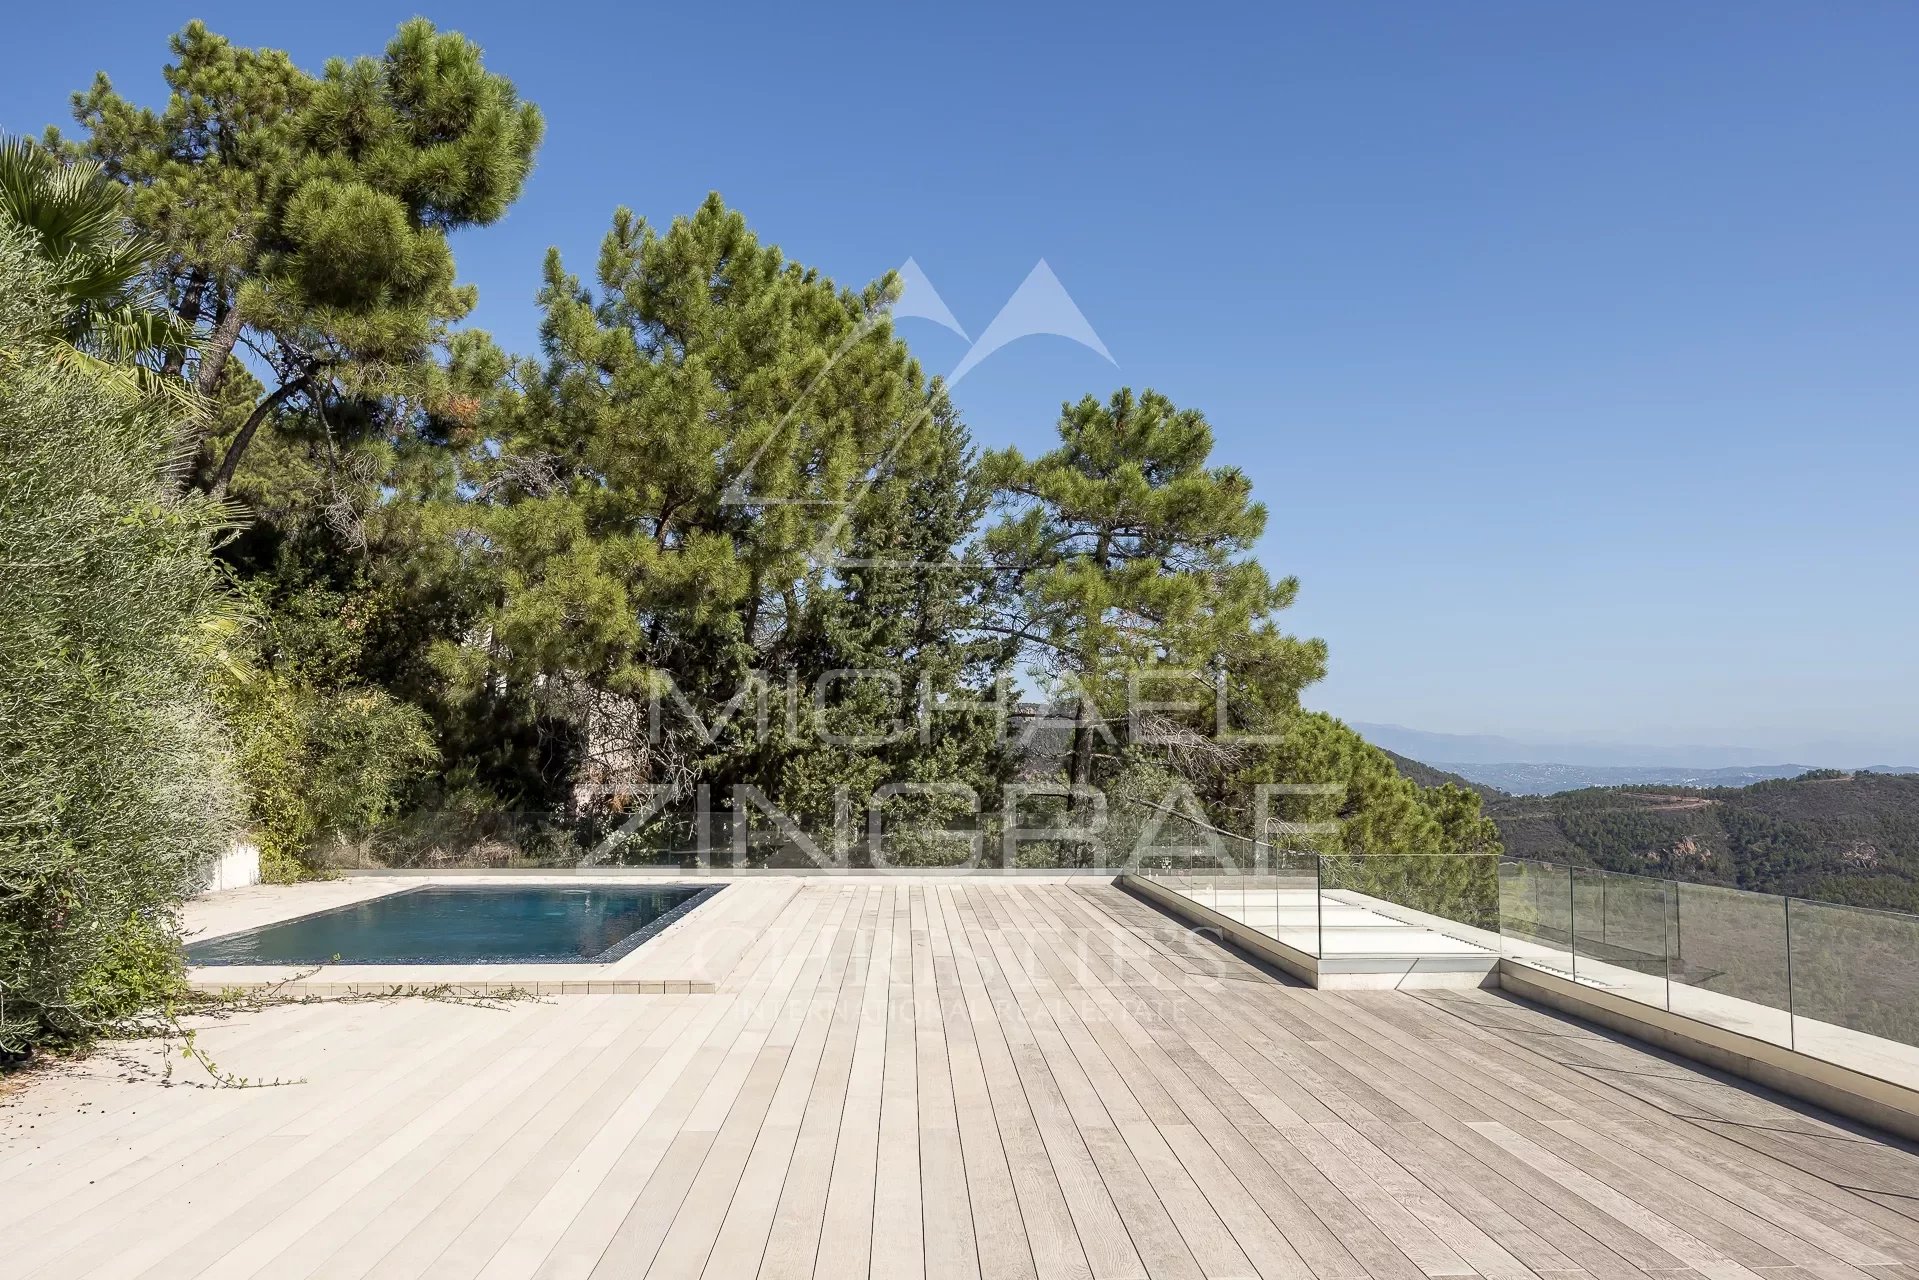 Close to Cannes - Le Trayas - magnificent sea view